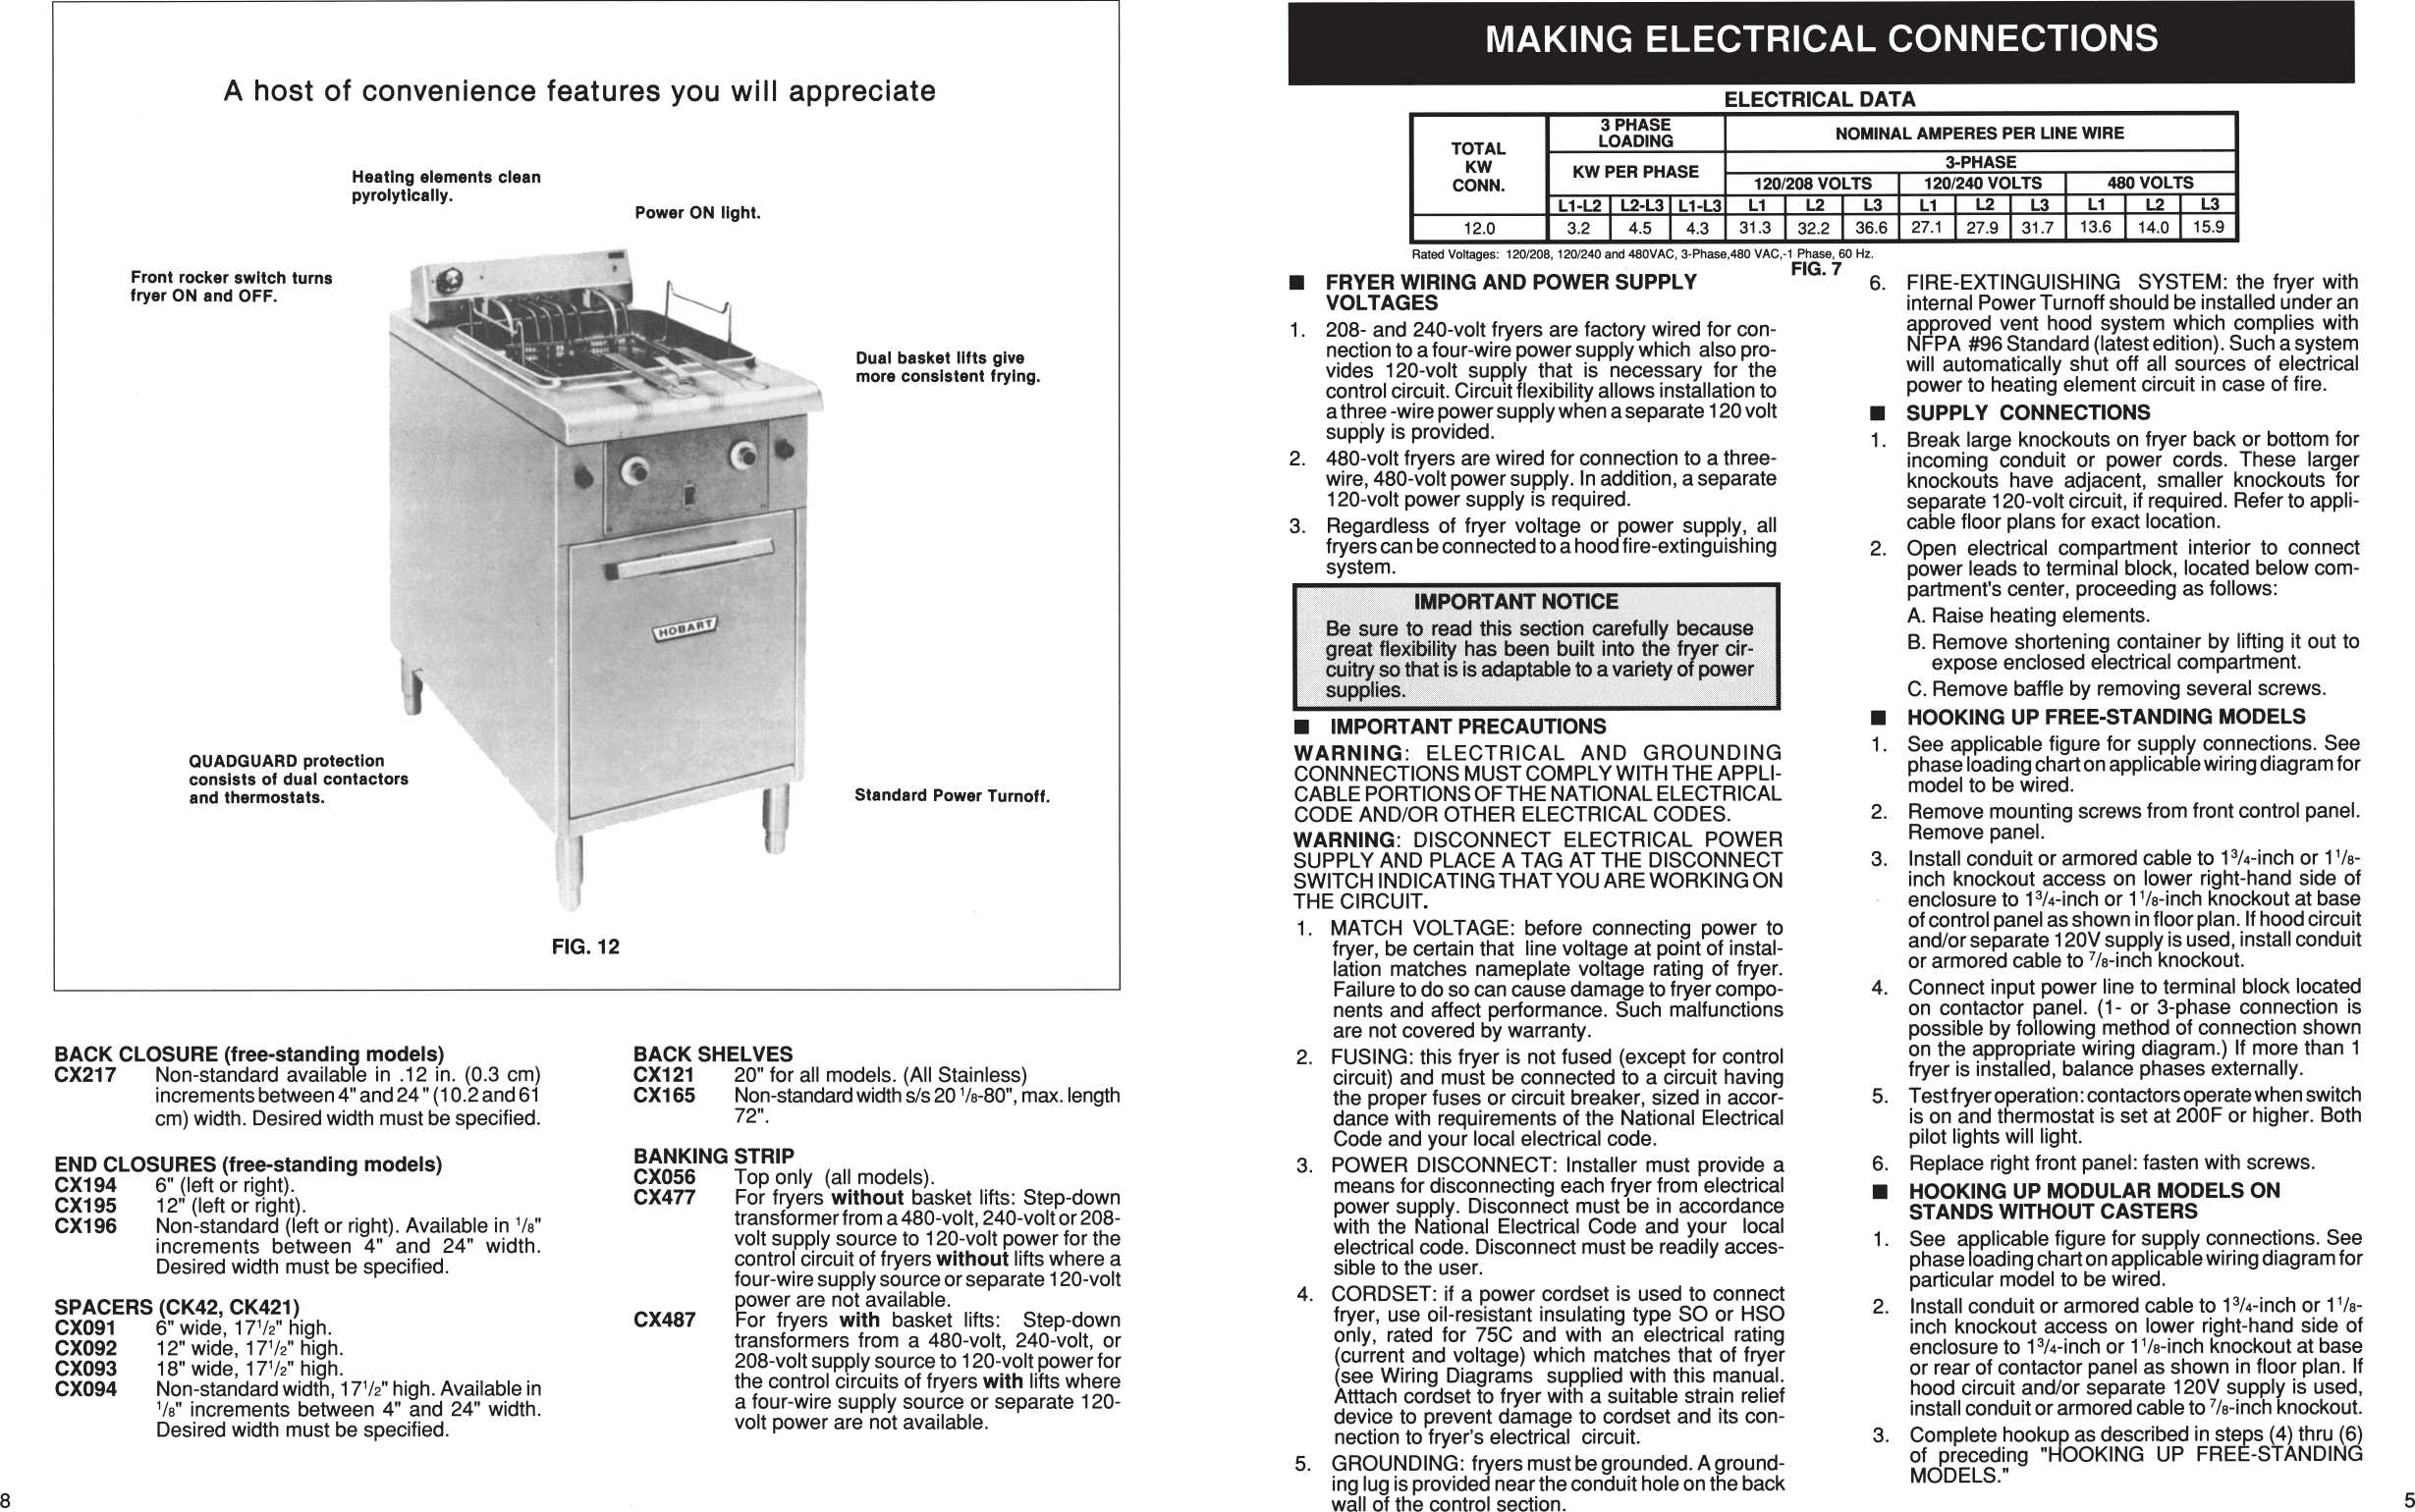 Page 5 of 12 - Hobart Hobart-Corp-Fryer-Ck40-Users-Manual- F27400  Hobart-corp-fryer-ck40-users-manual